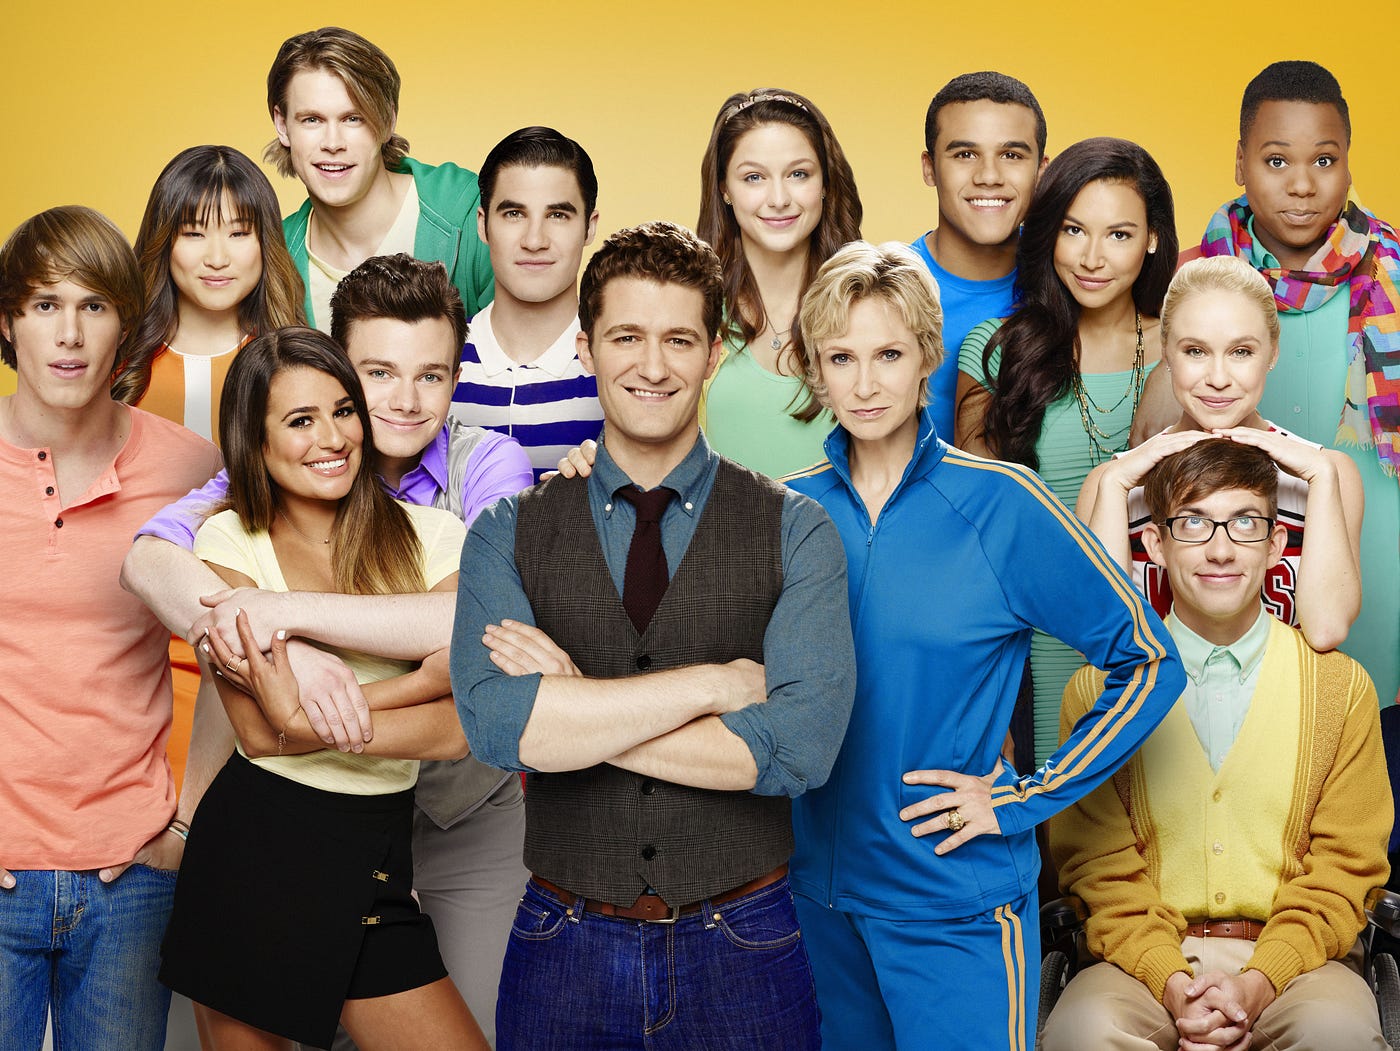 I Ranked All 705 Songs From “Glee” | by Damon Jimmy Horn | Medium